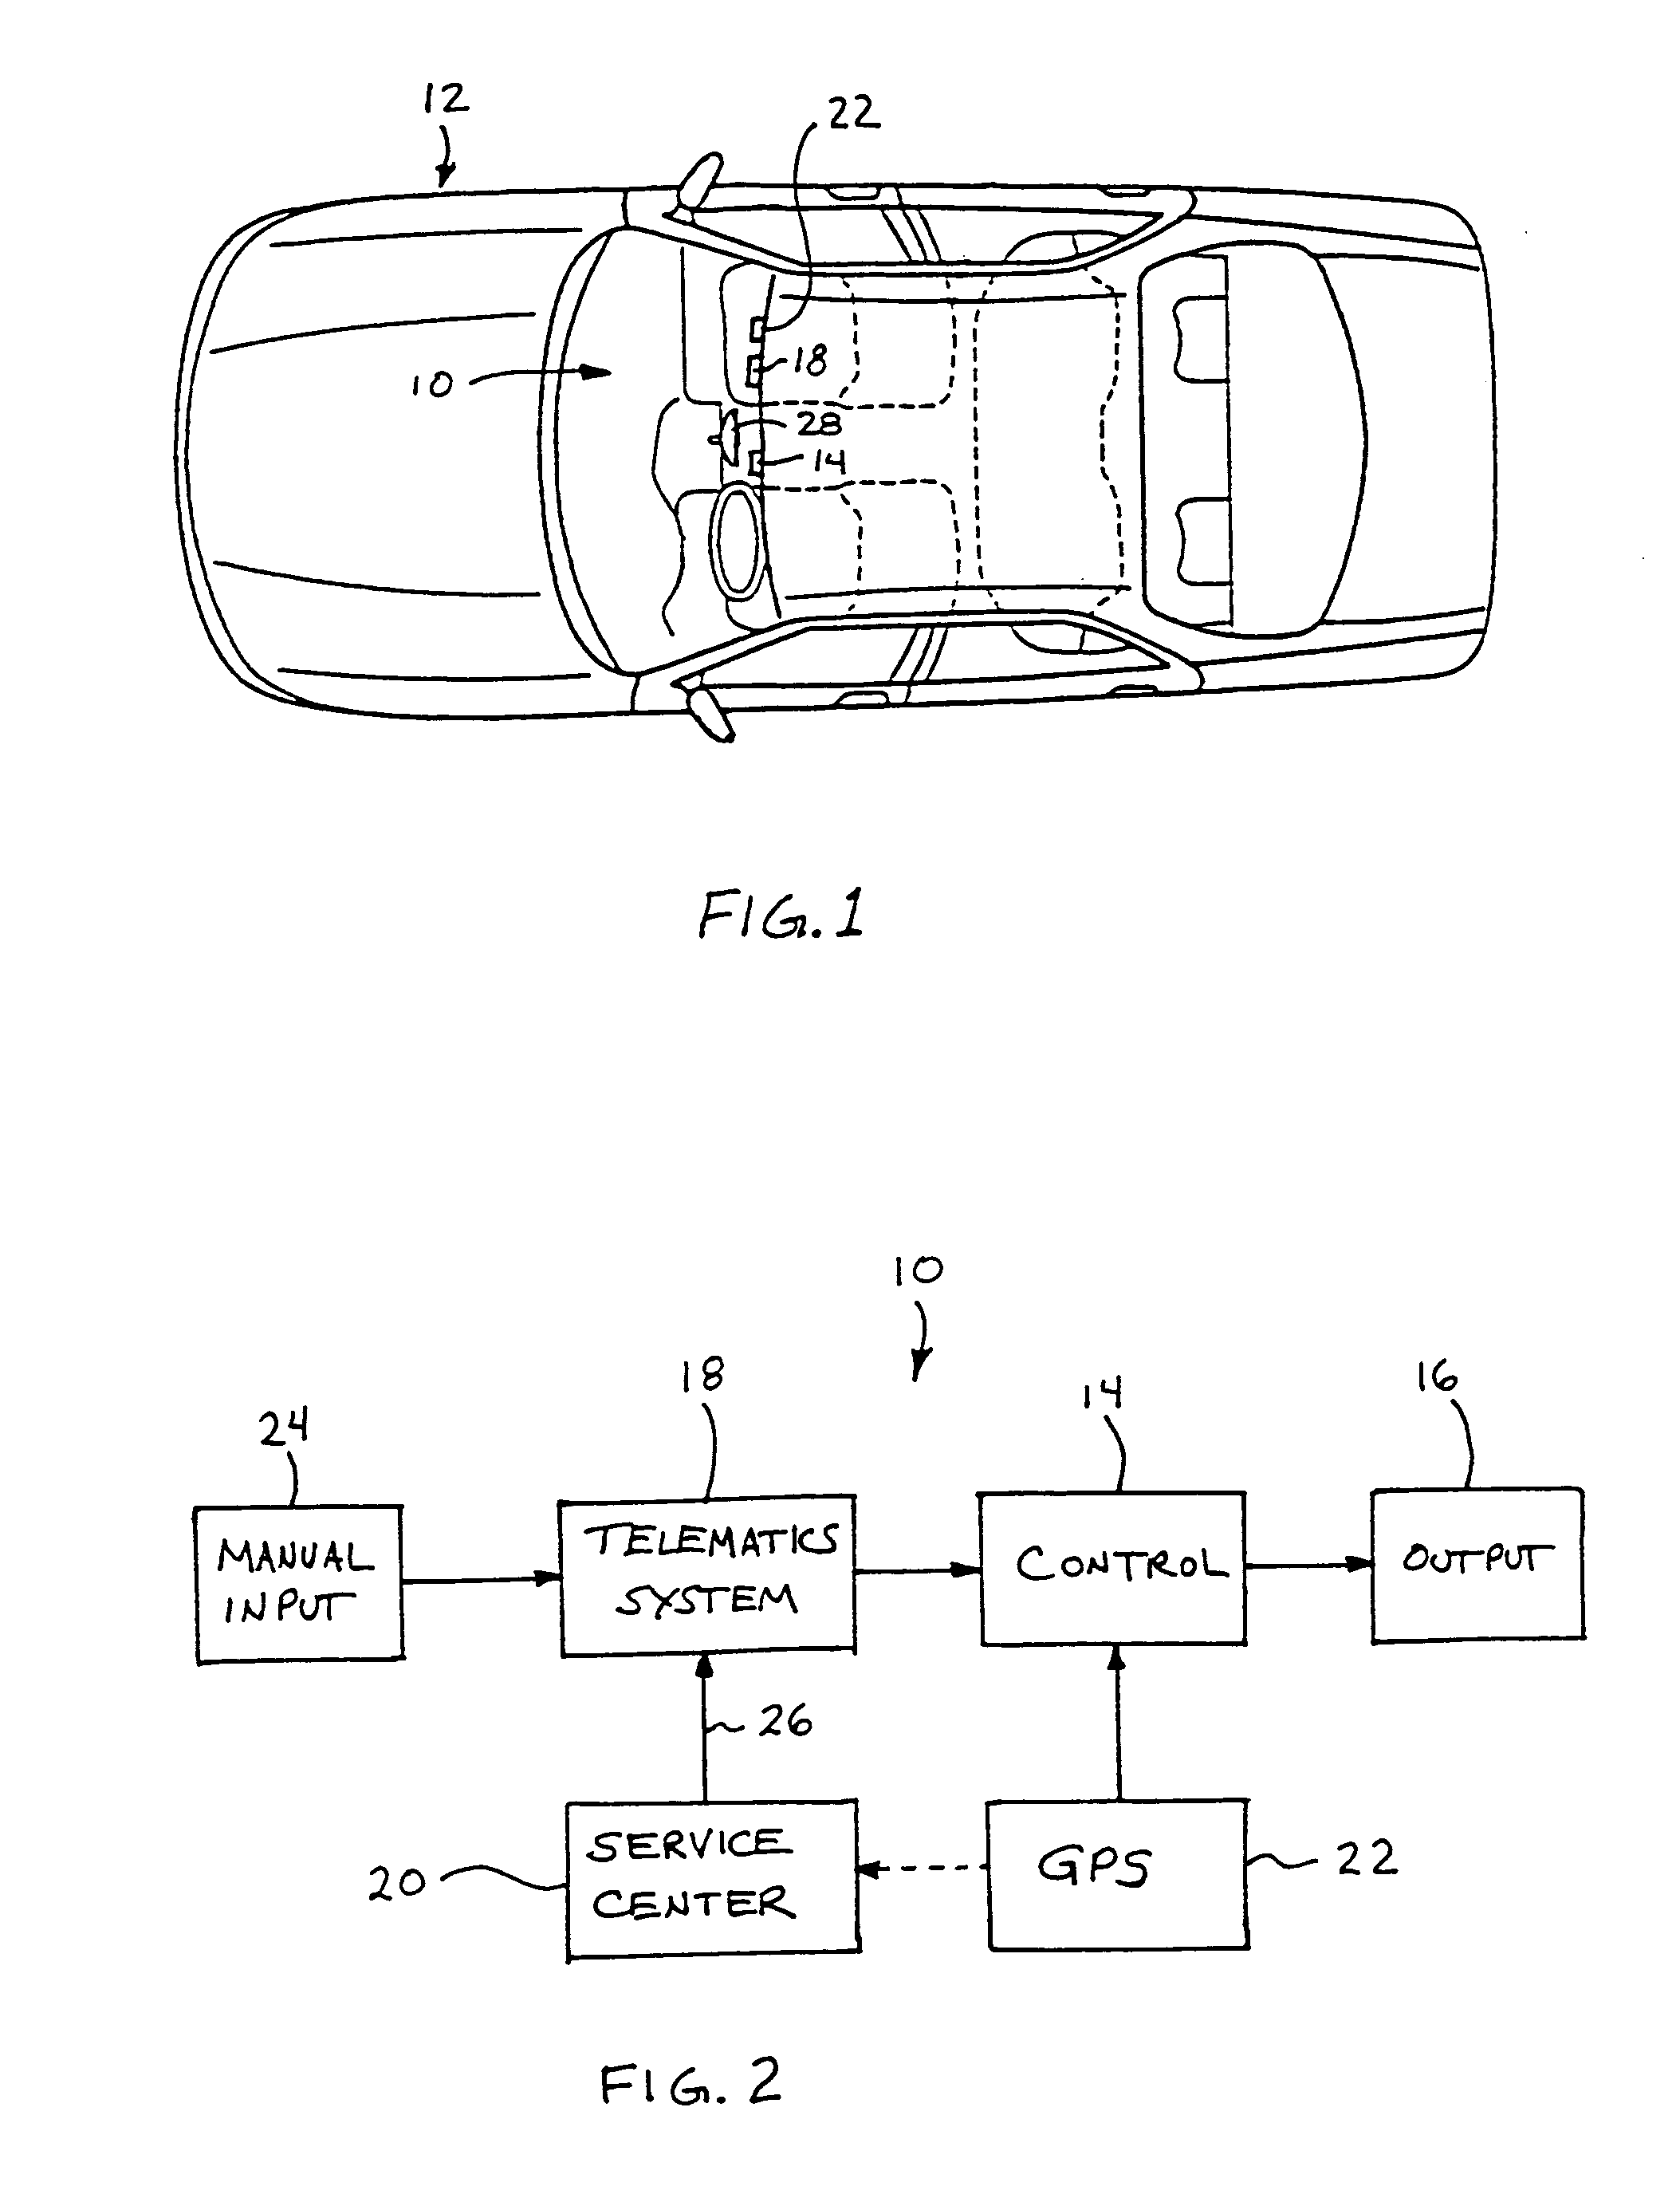 Vehicle navigation system for use with a telematics system